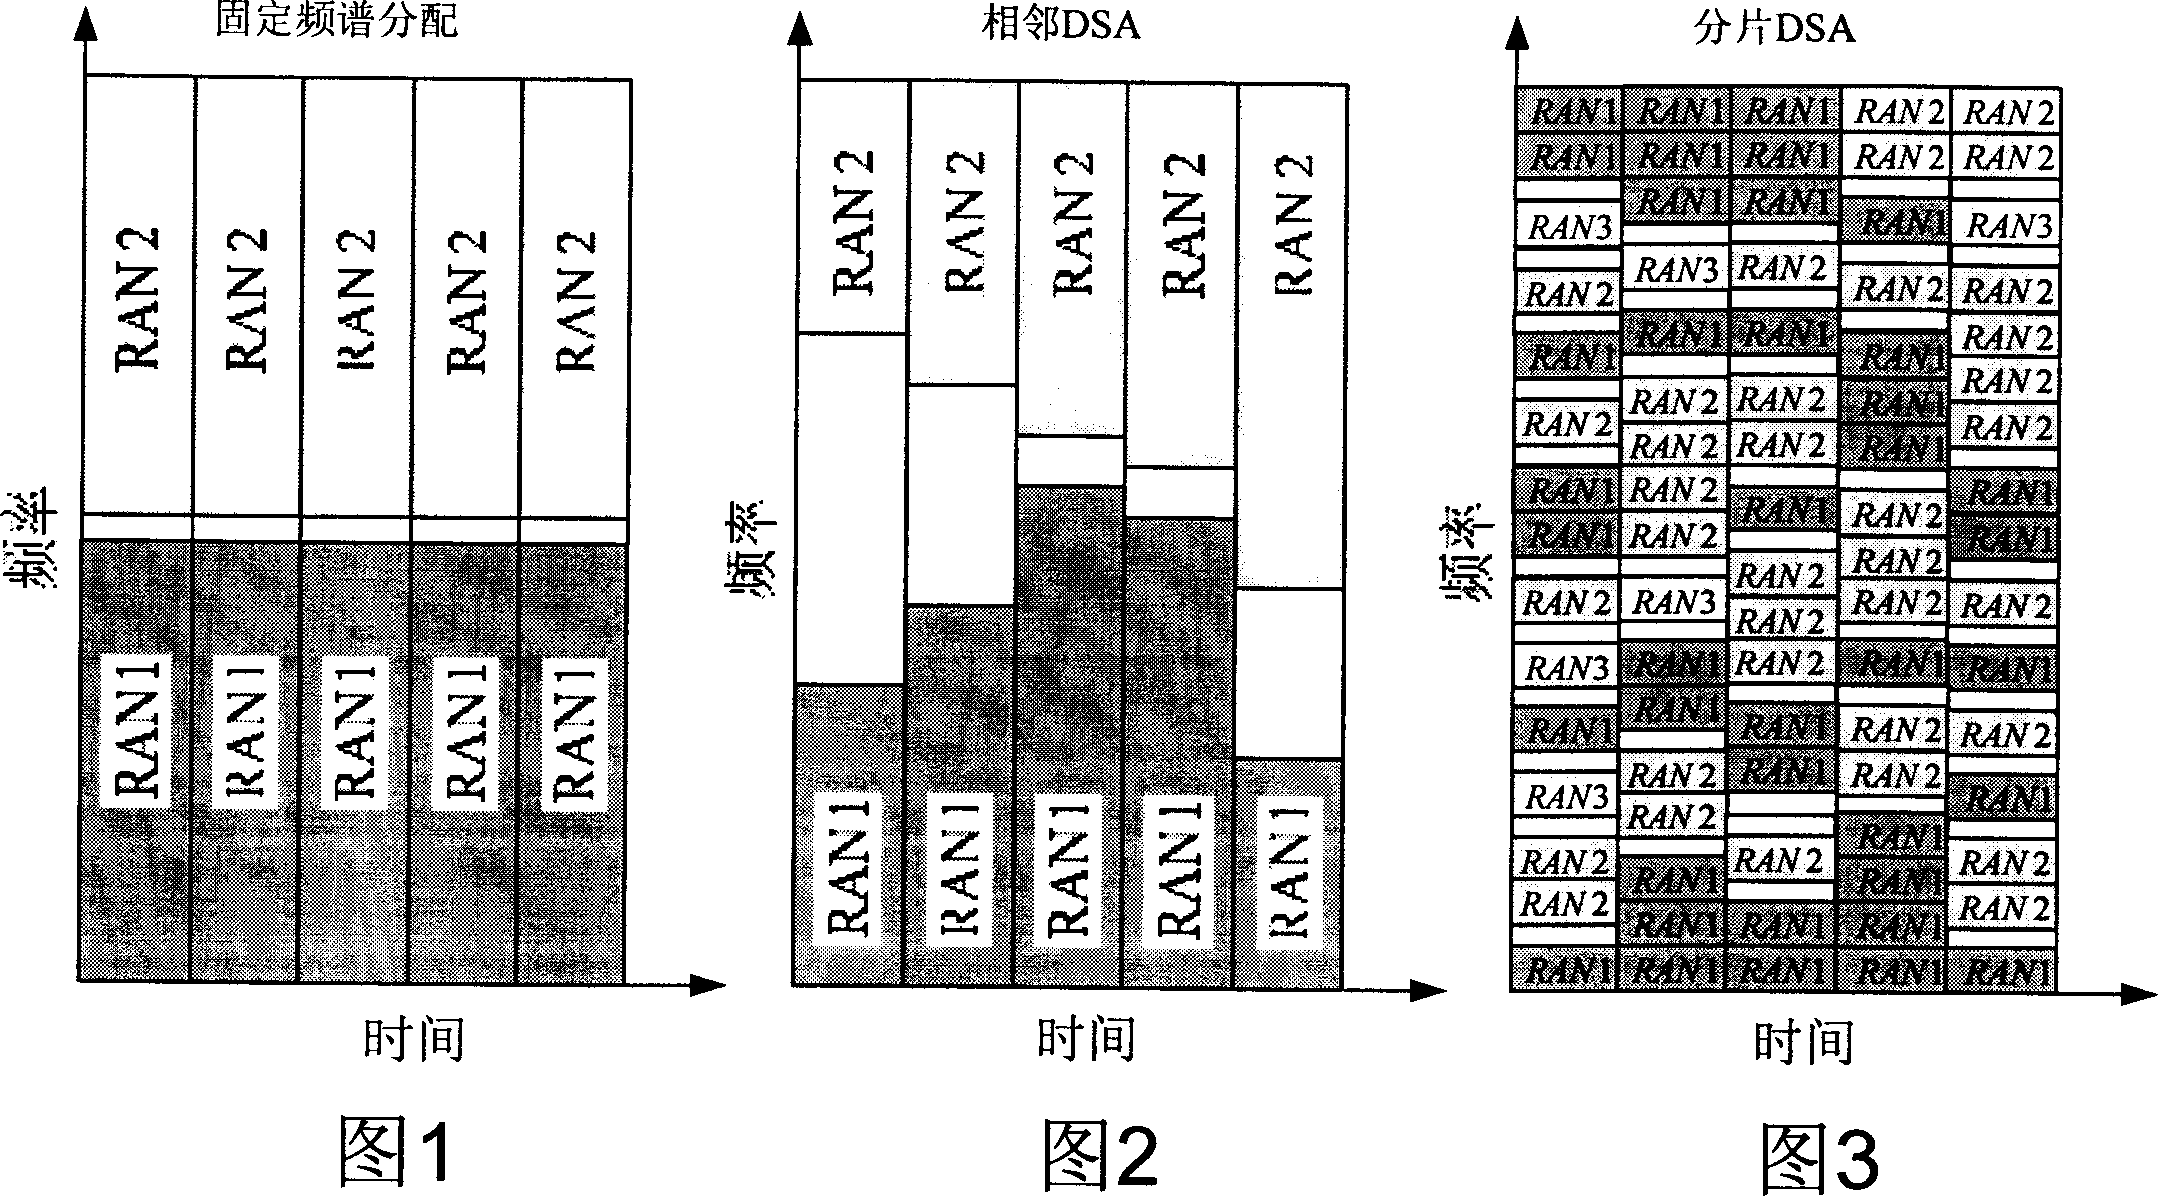 Method for assigning dynamic frequency spectrum of multiple radio system based on dynamic boundary of virtual frequency spectrum